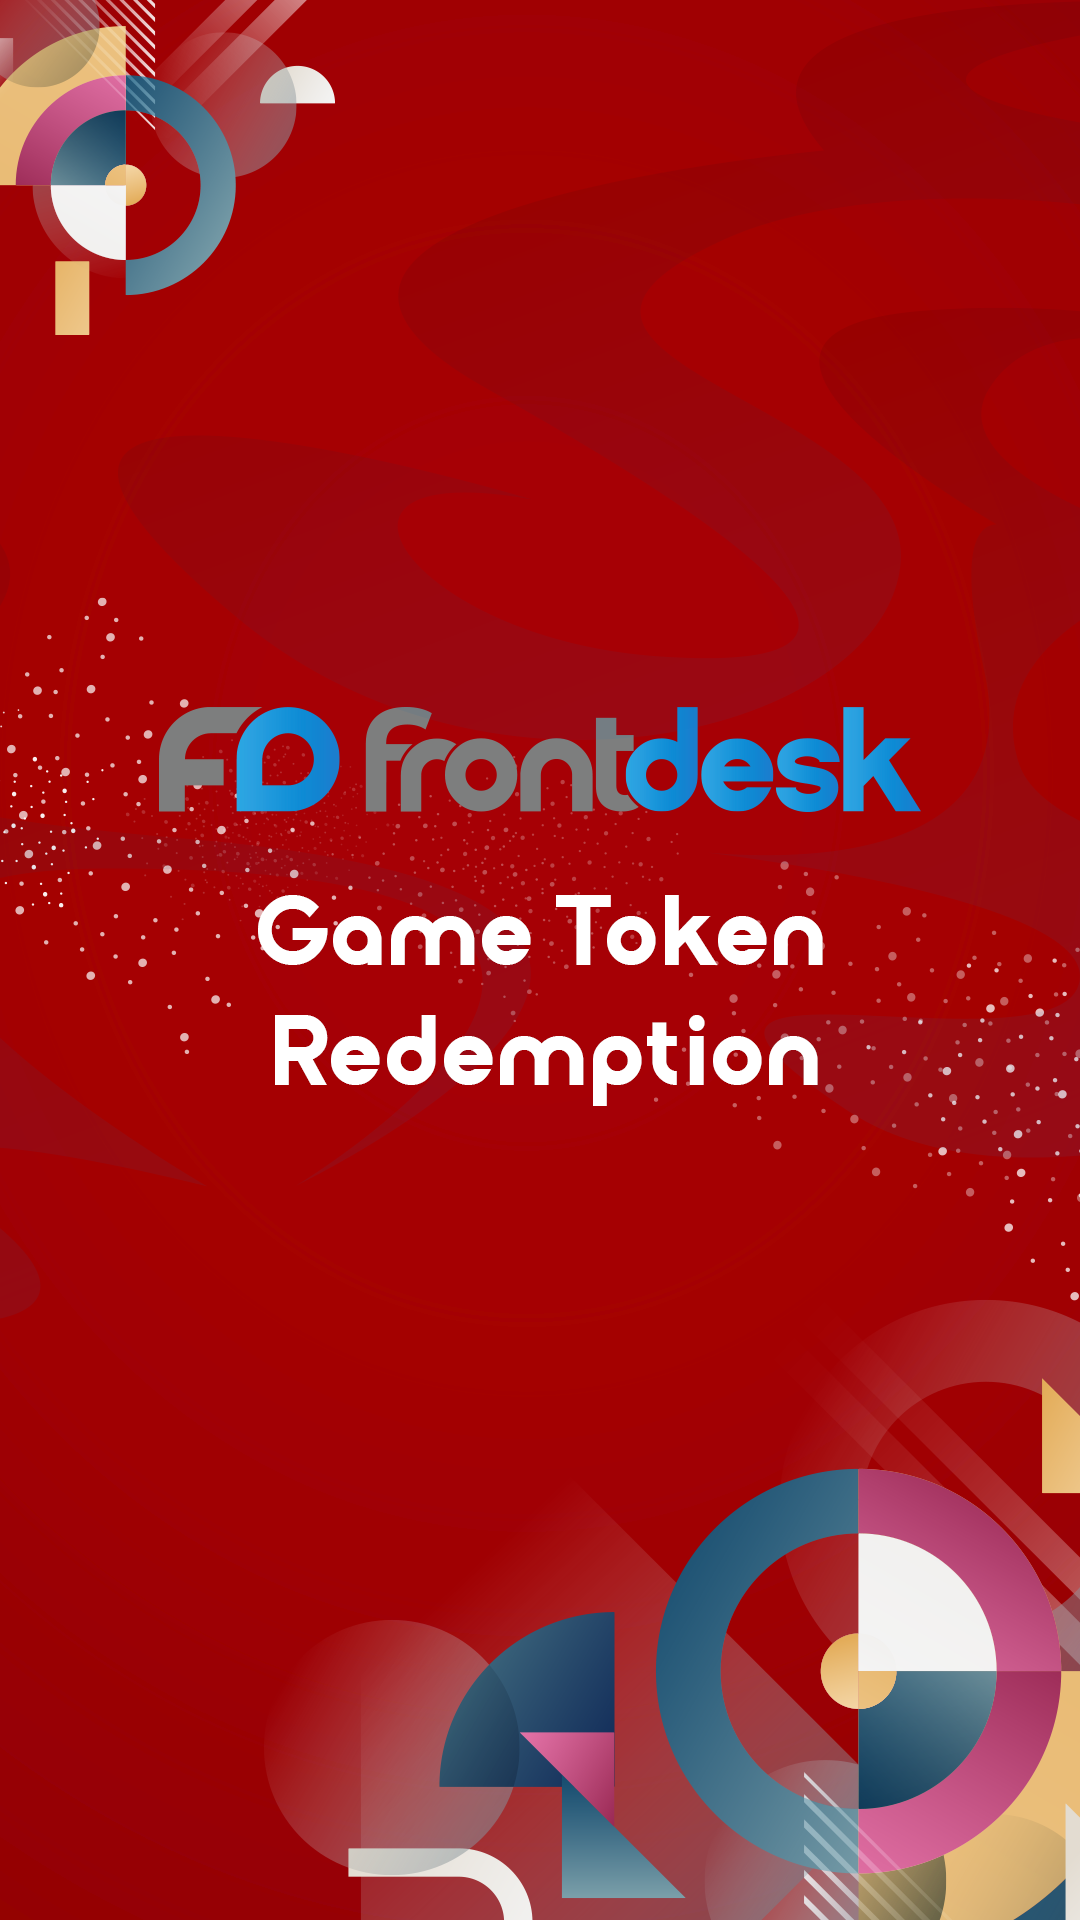 The image shows an Event Technology Kiosk designed specifically for game token redemption. The kiosk serves as a station where event attendees can redeem game tokens, likely earned or purchased, to access games or activities within the event. The kiosk is equipped with features and interfaces that facilitate the redemption process, allowing attendees to exchange their tokens for gaming opportunities or rewards.